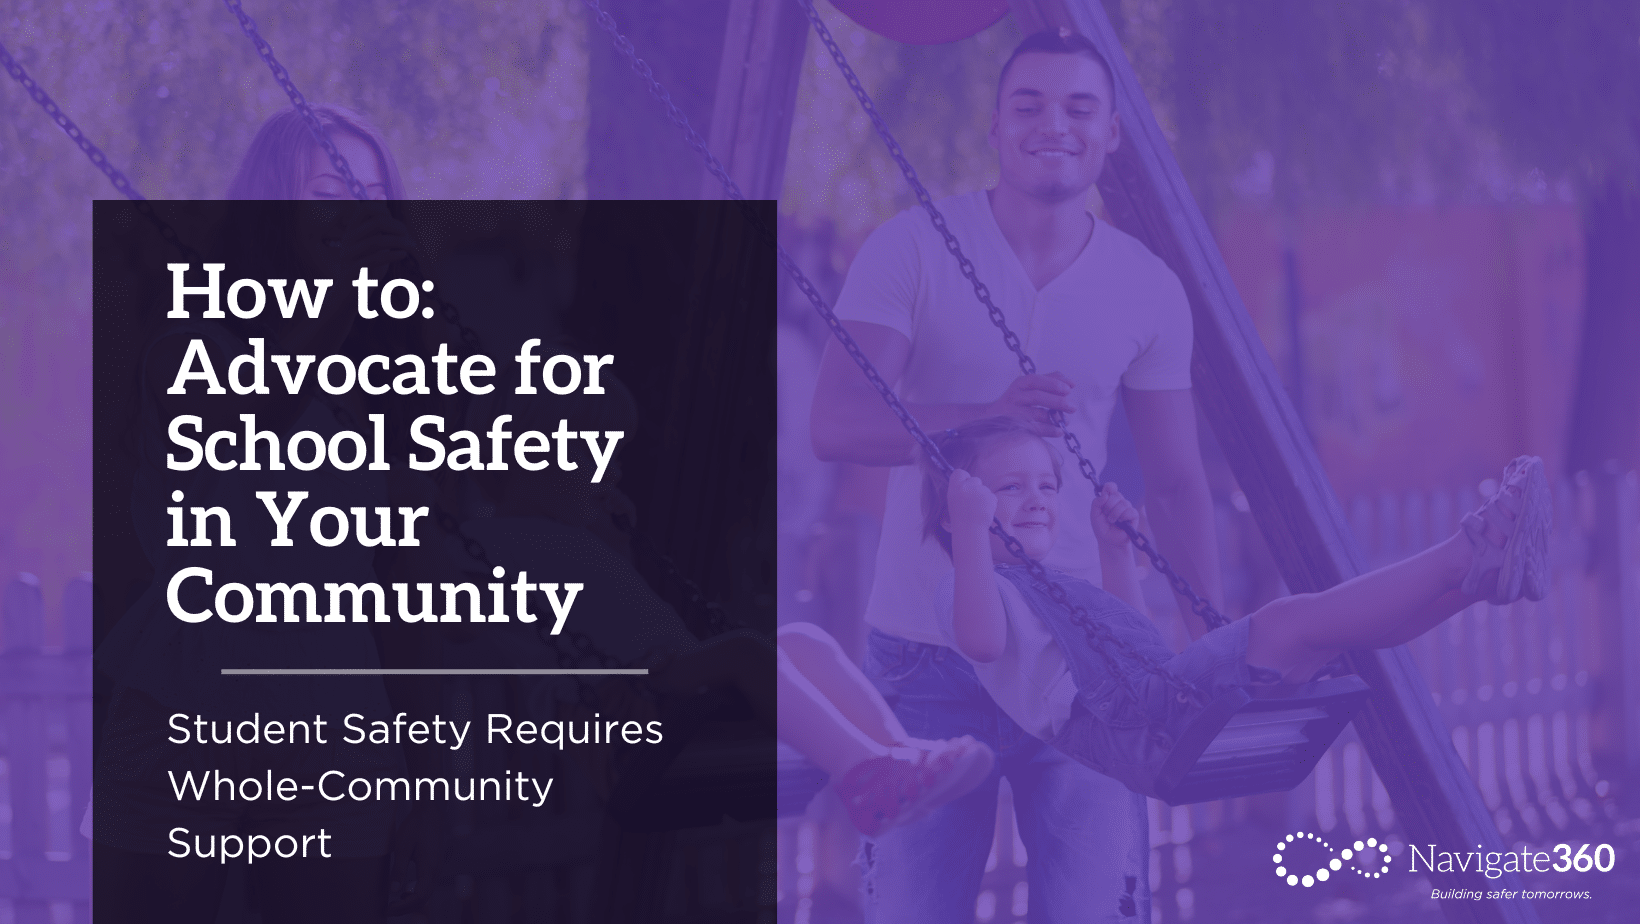 How To: Advocate for School Safety in Your Community